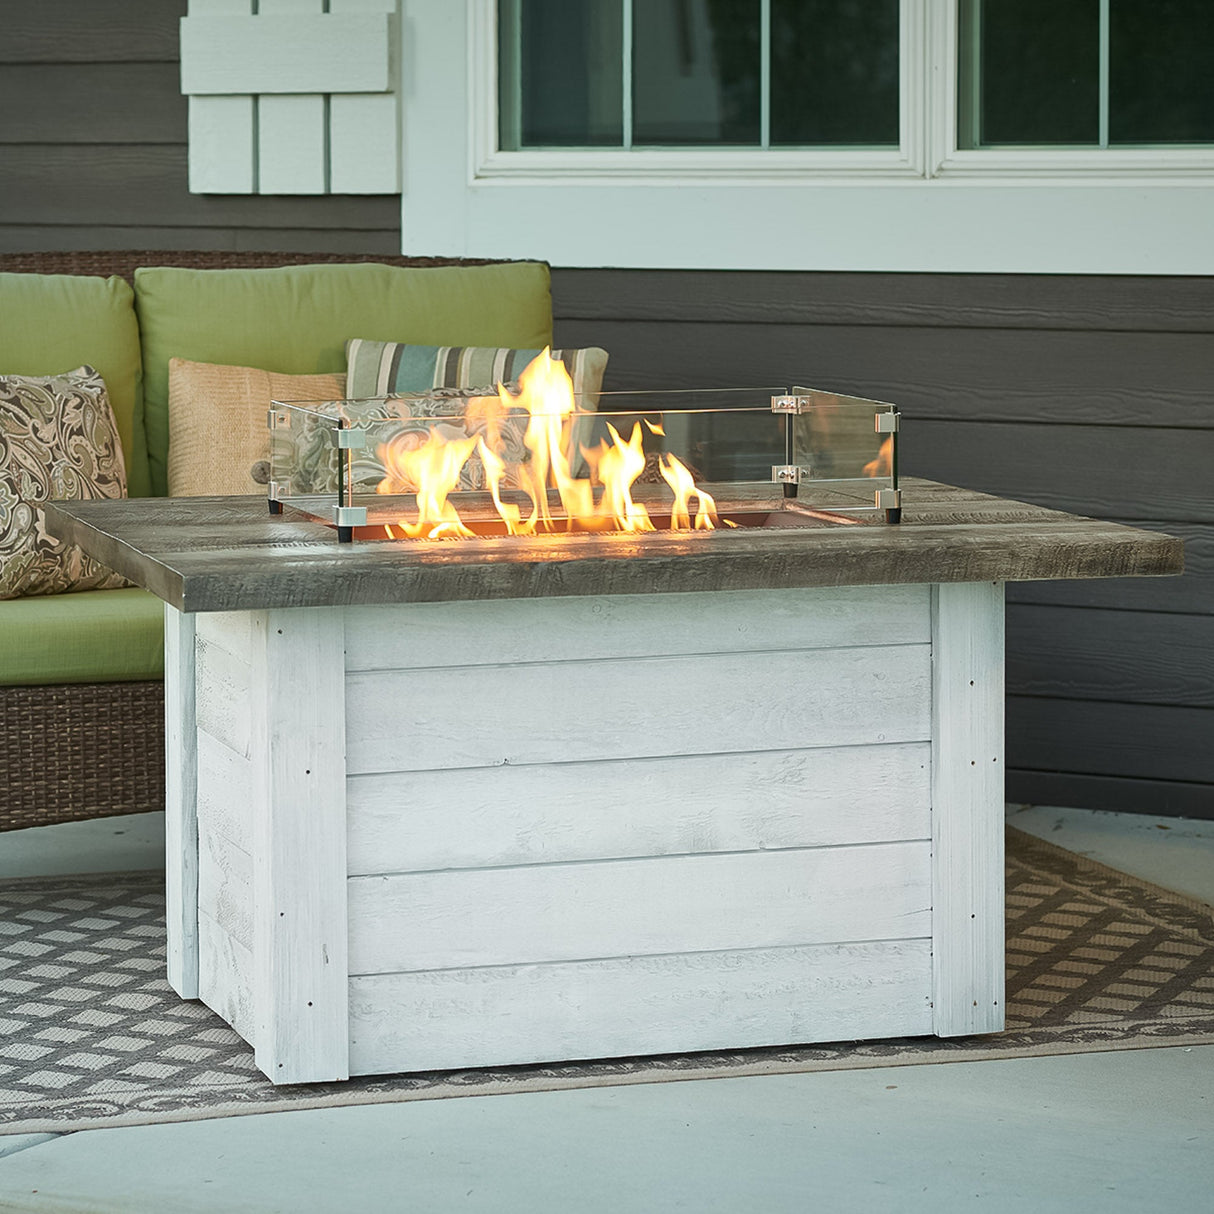 A glass wind guard placed on a Alcott Rectangular Gas Fire Pit Table to protect the large flame from the wind